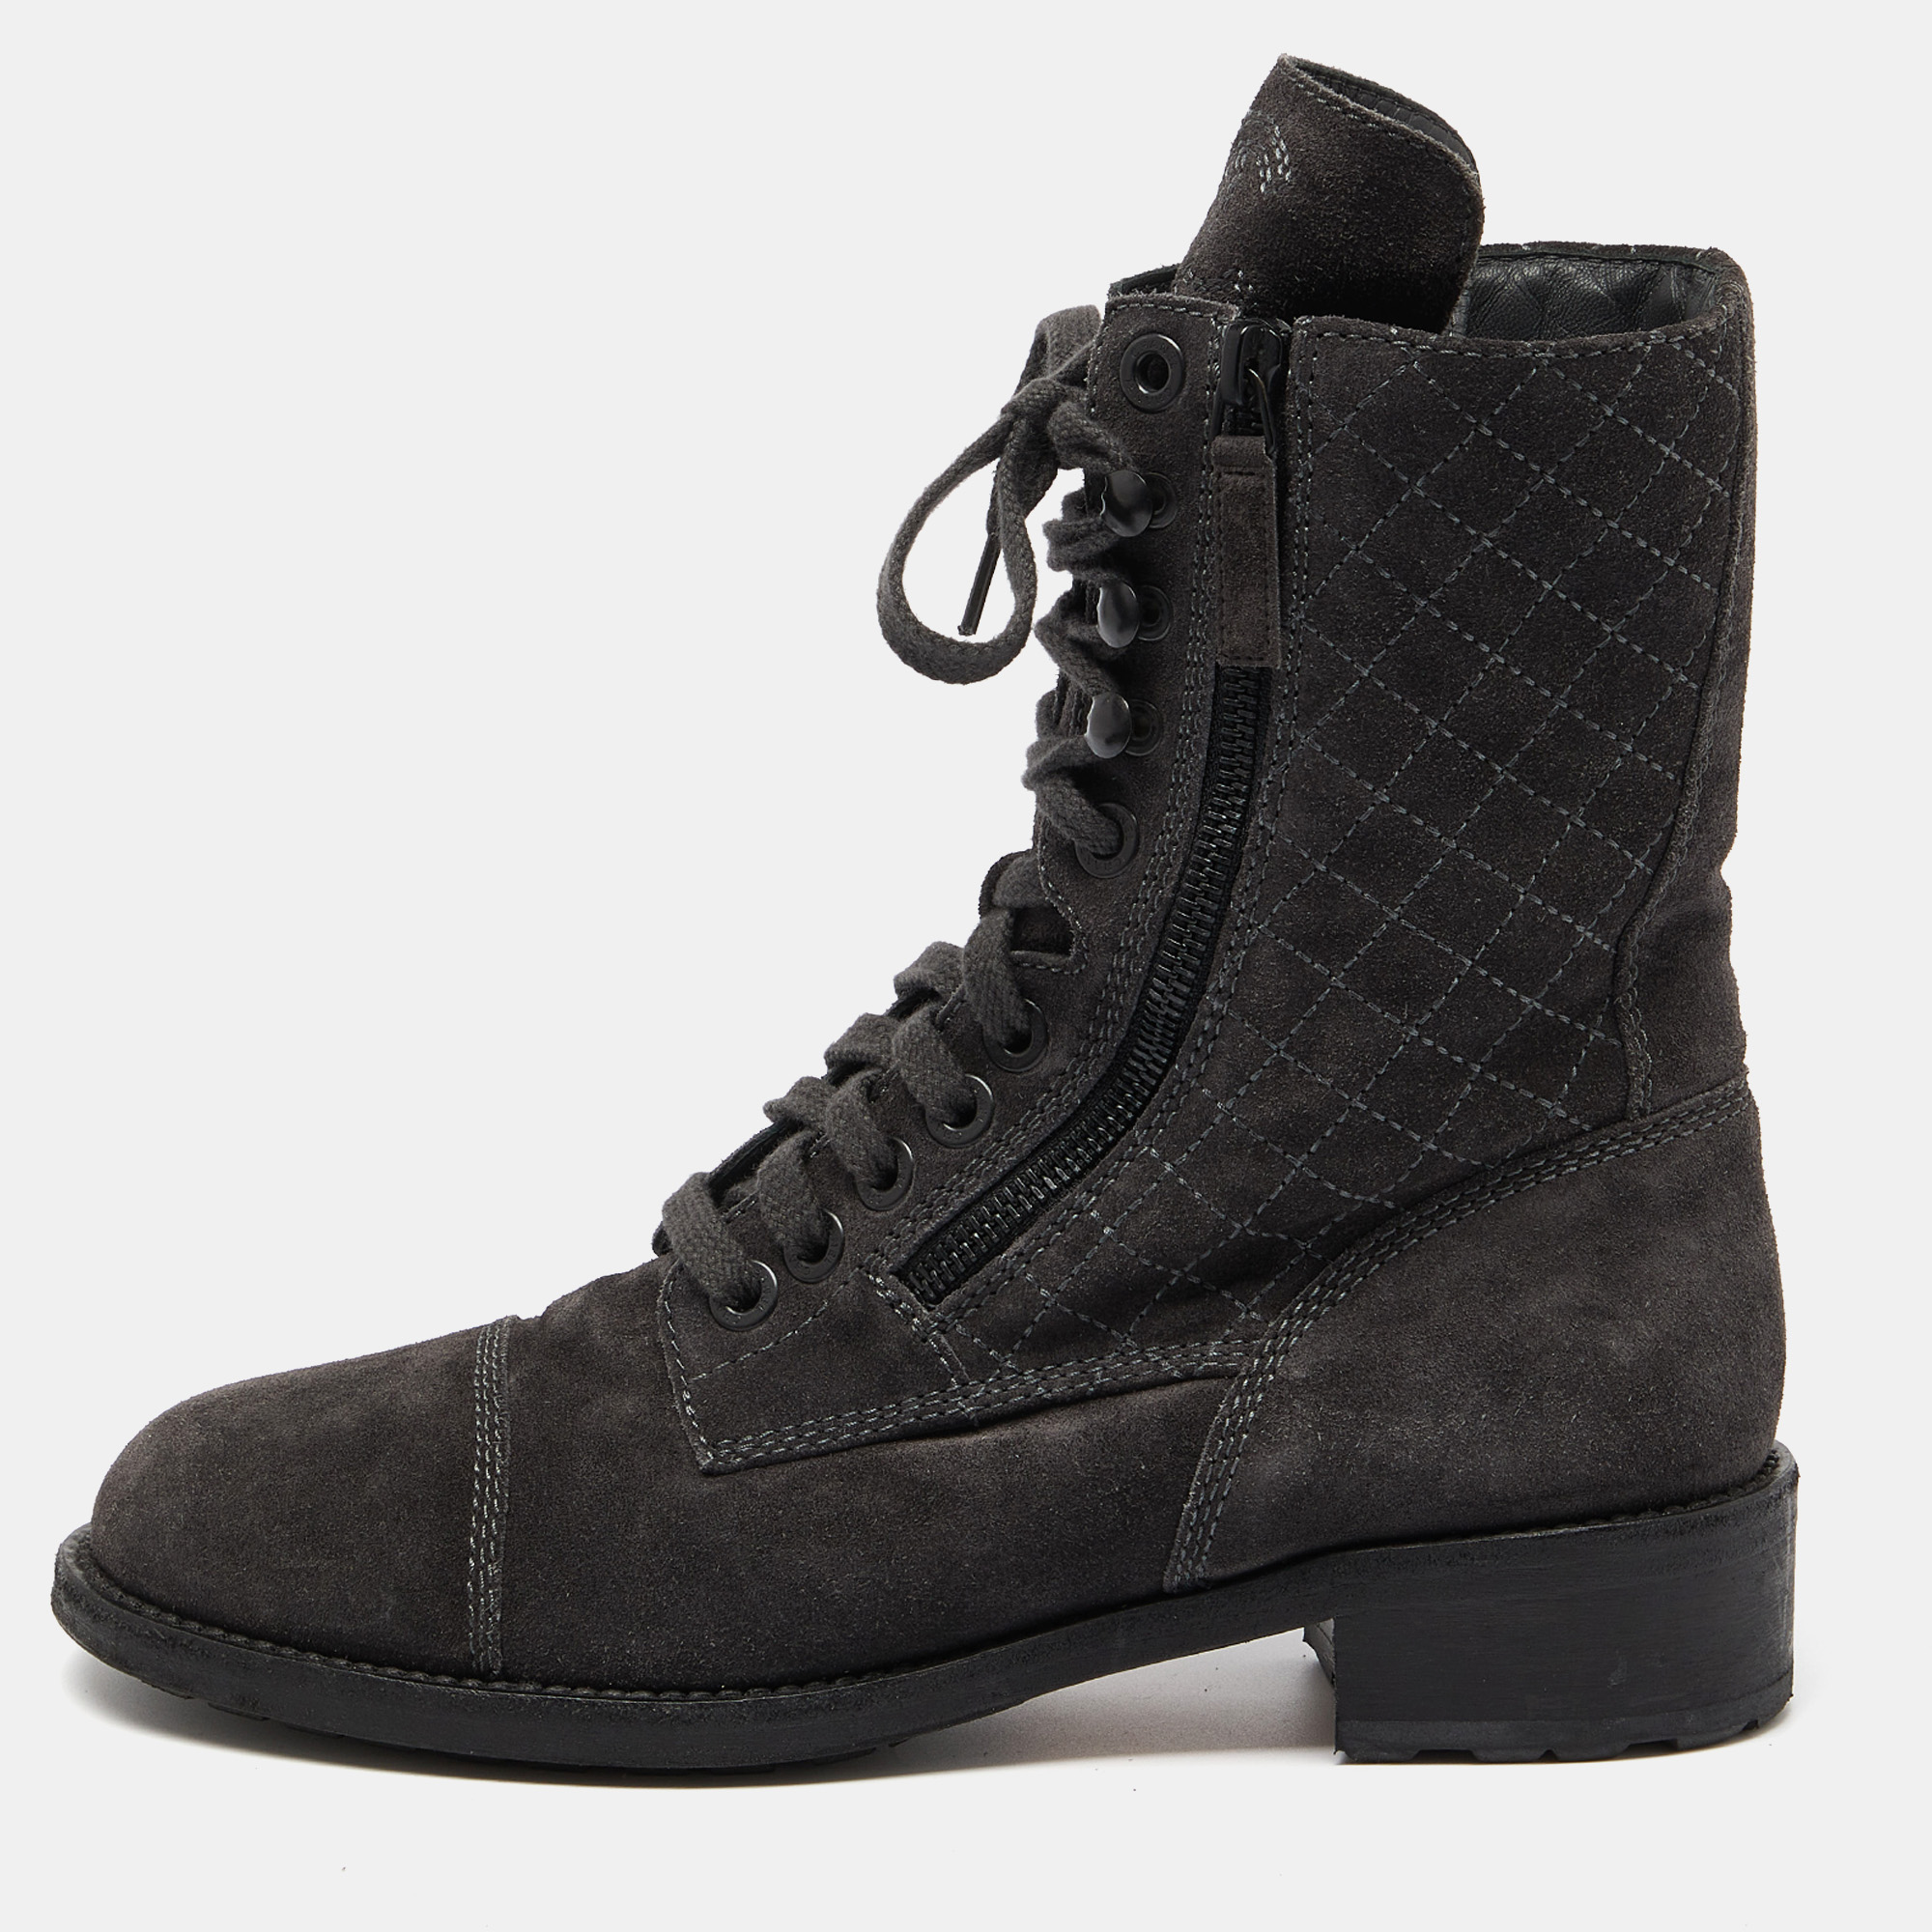 Chanel dark grey quilted suede cc ankle boots size 39.5